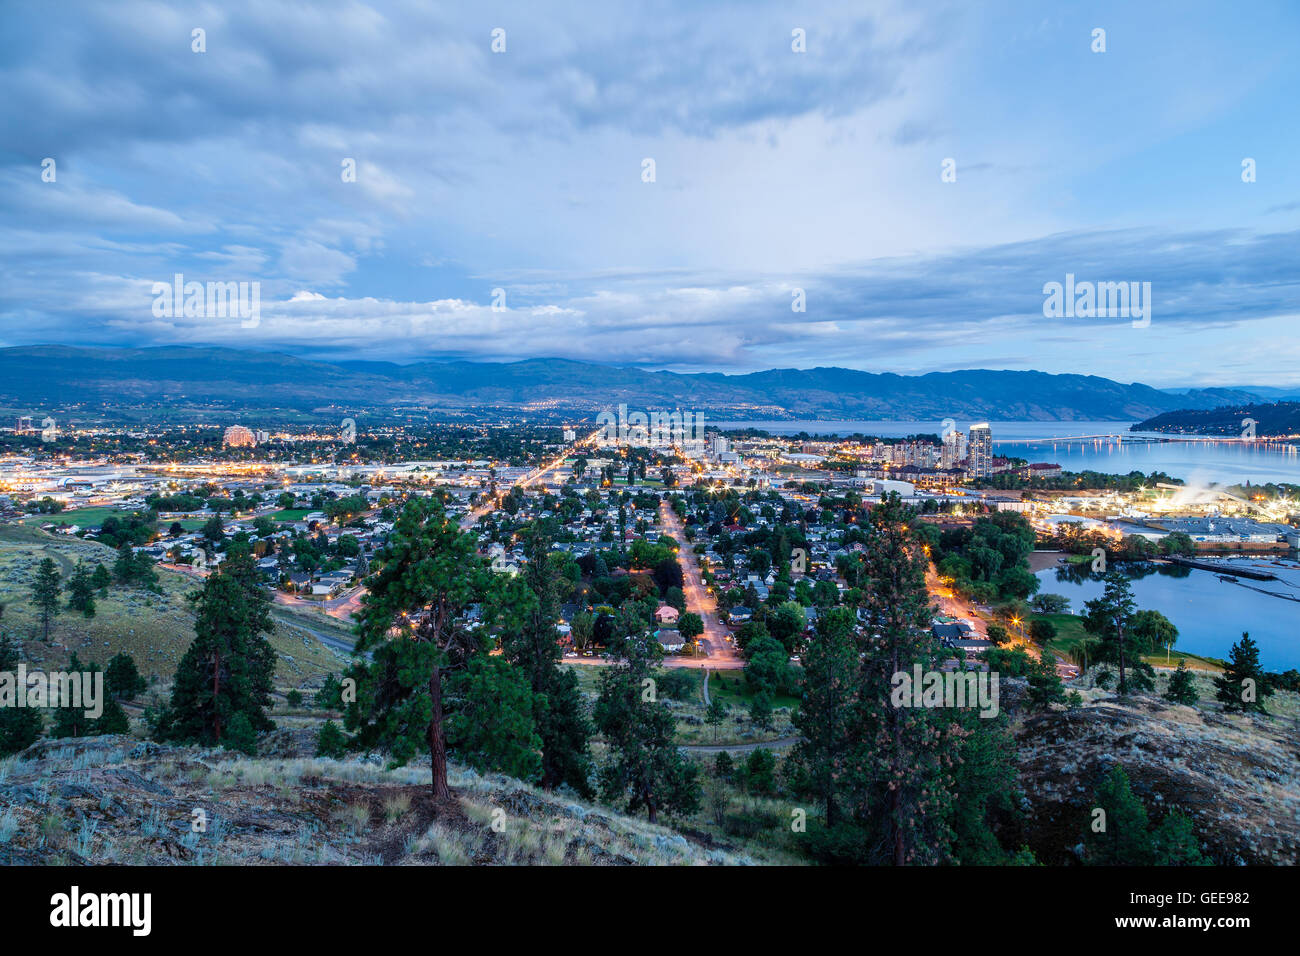 Aerial View of Kelowna, British Columbia, just after sunset on Knox Mountain, Canada. Stock Photo